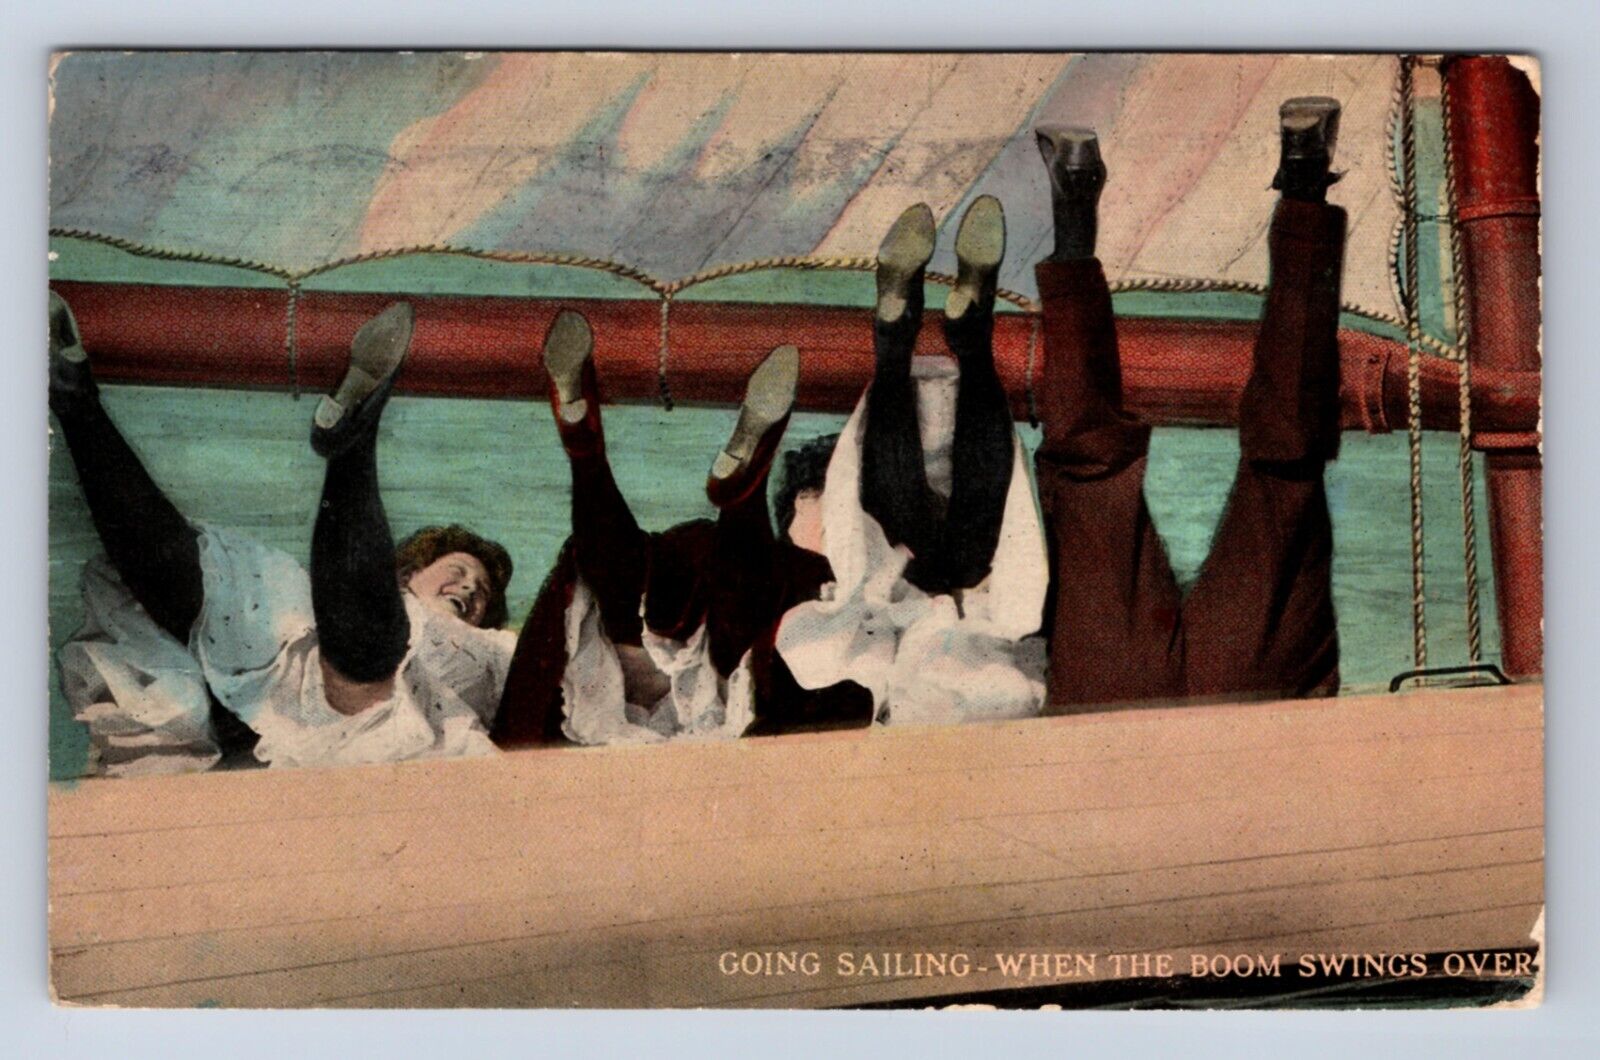 VINTAGE GOING SAILING WHEN THE BOOM SWINGS OVER~c1913 POSTCARD BM